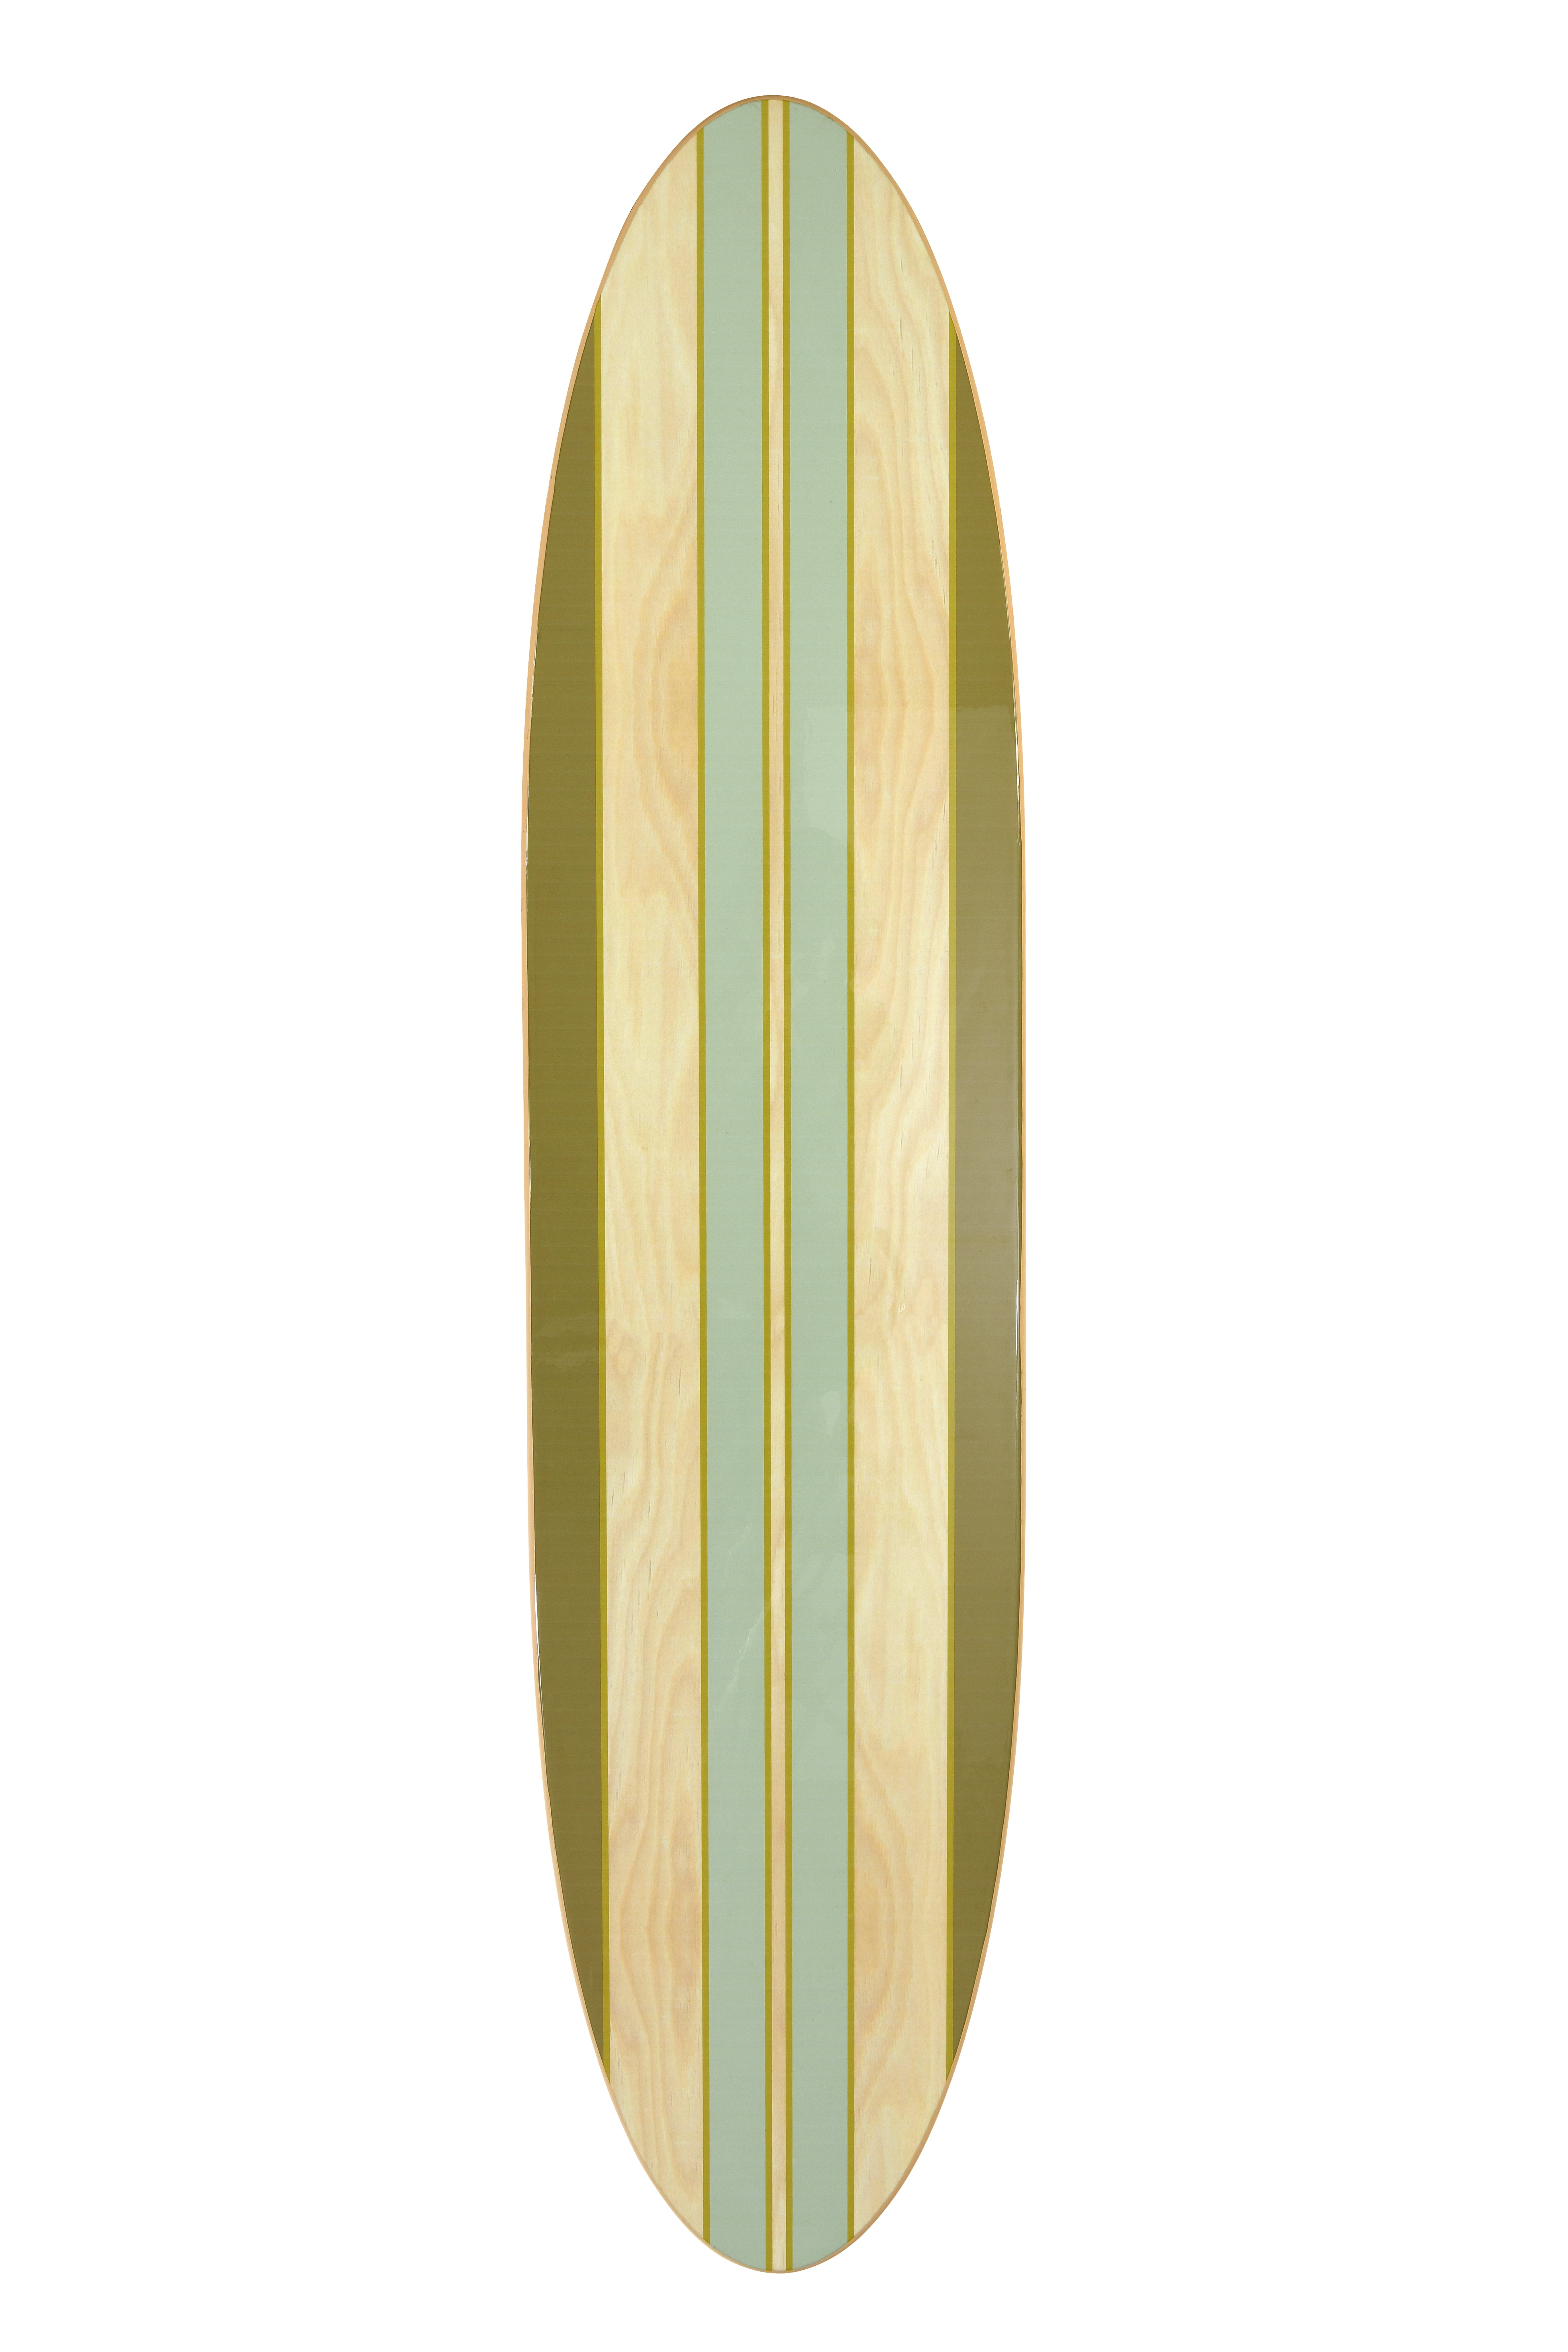 Green Decorative Surfboard Hangs Vertical or Horizontal Creative Co-Op Lacquered Wood Wall Décor with Stripes 